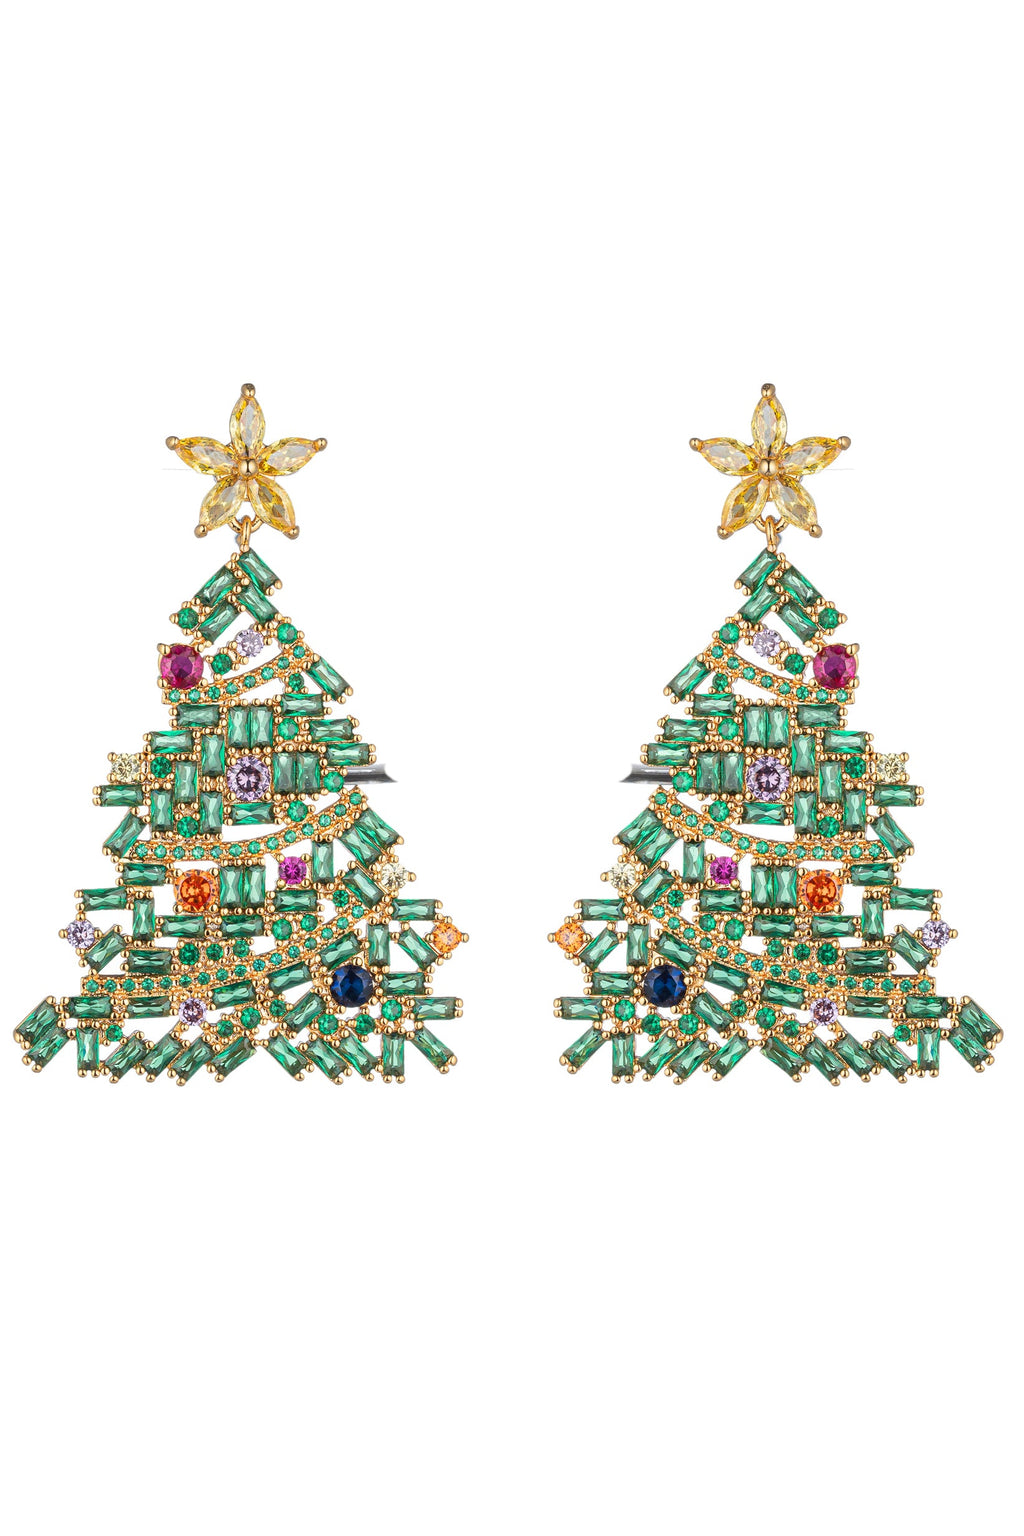 Green Christmas Tree Cubic Zirconia Drop Earrings: Festive Sparkle for the Holidays.